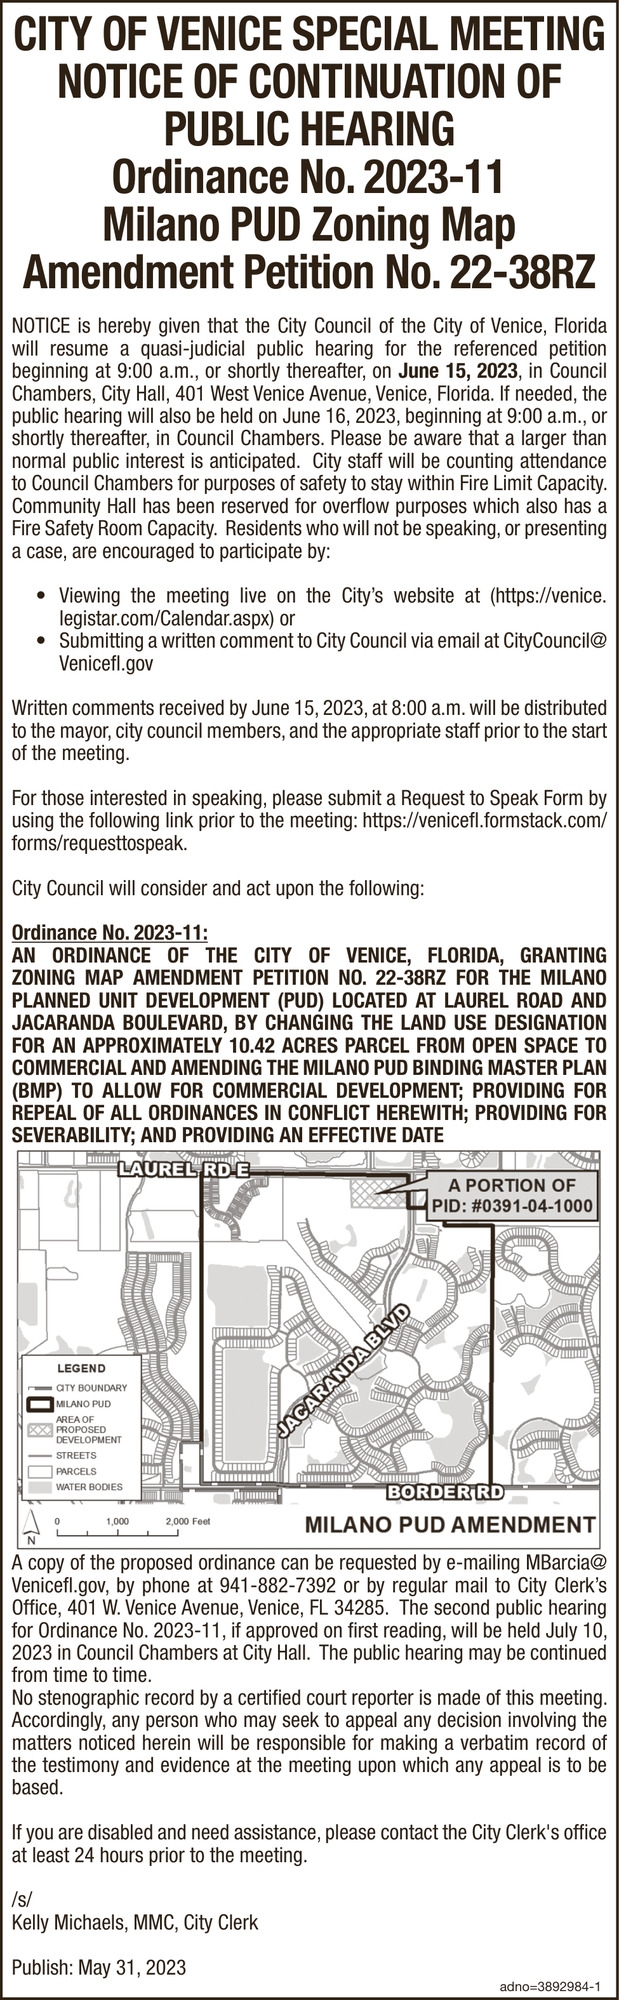 Notice of Continuation of Public Hearing